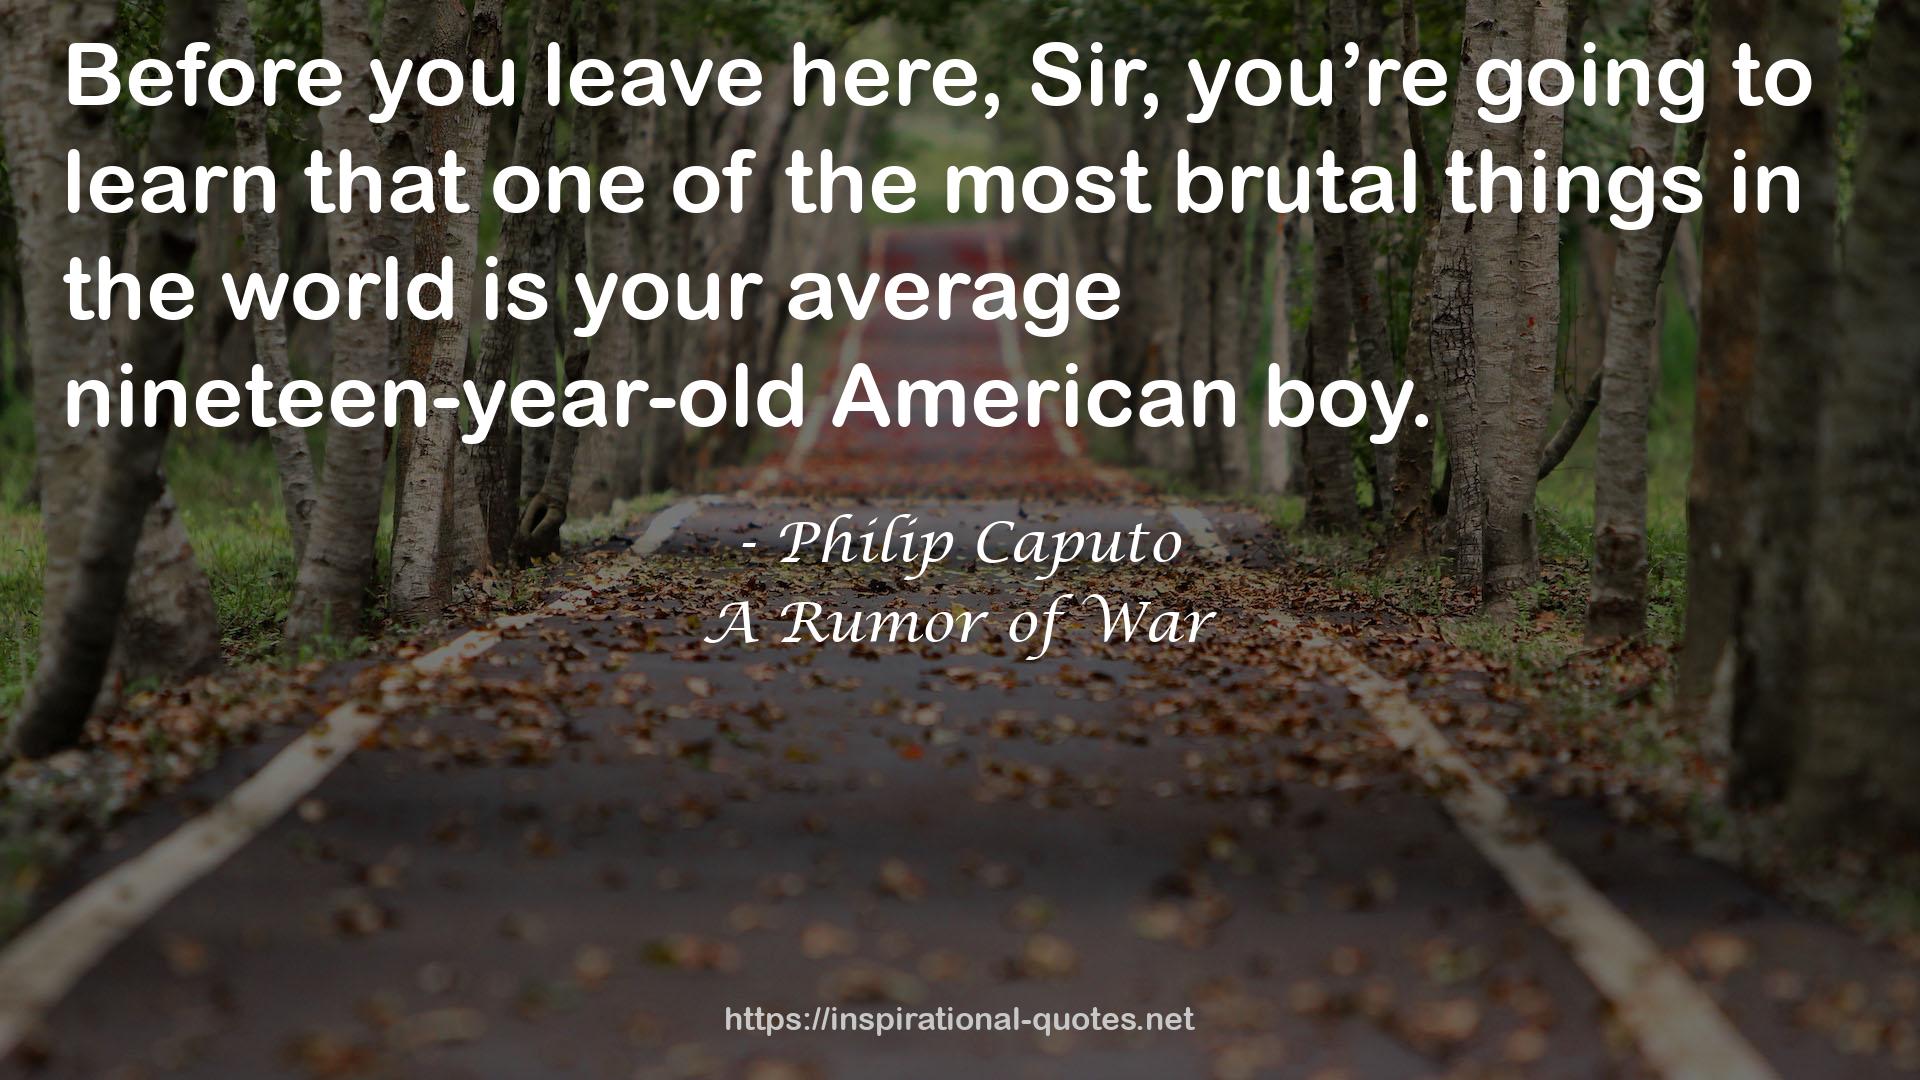 A Rumor of War QUOTES